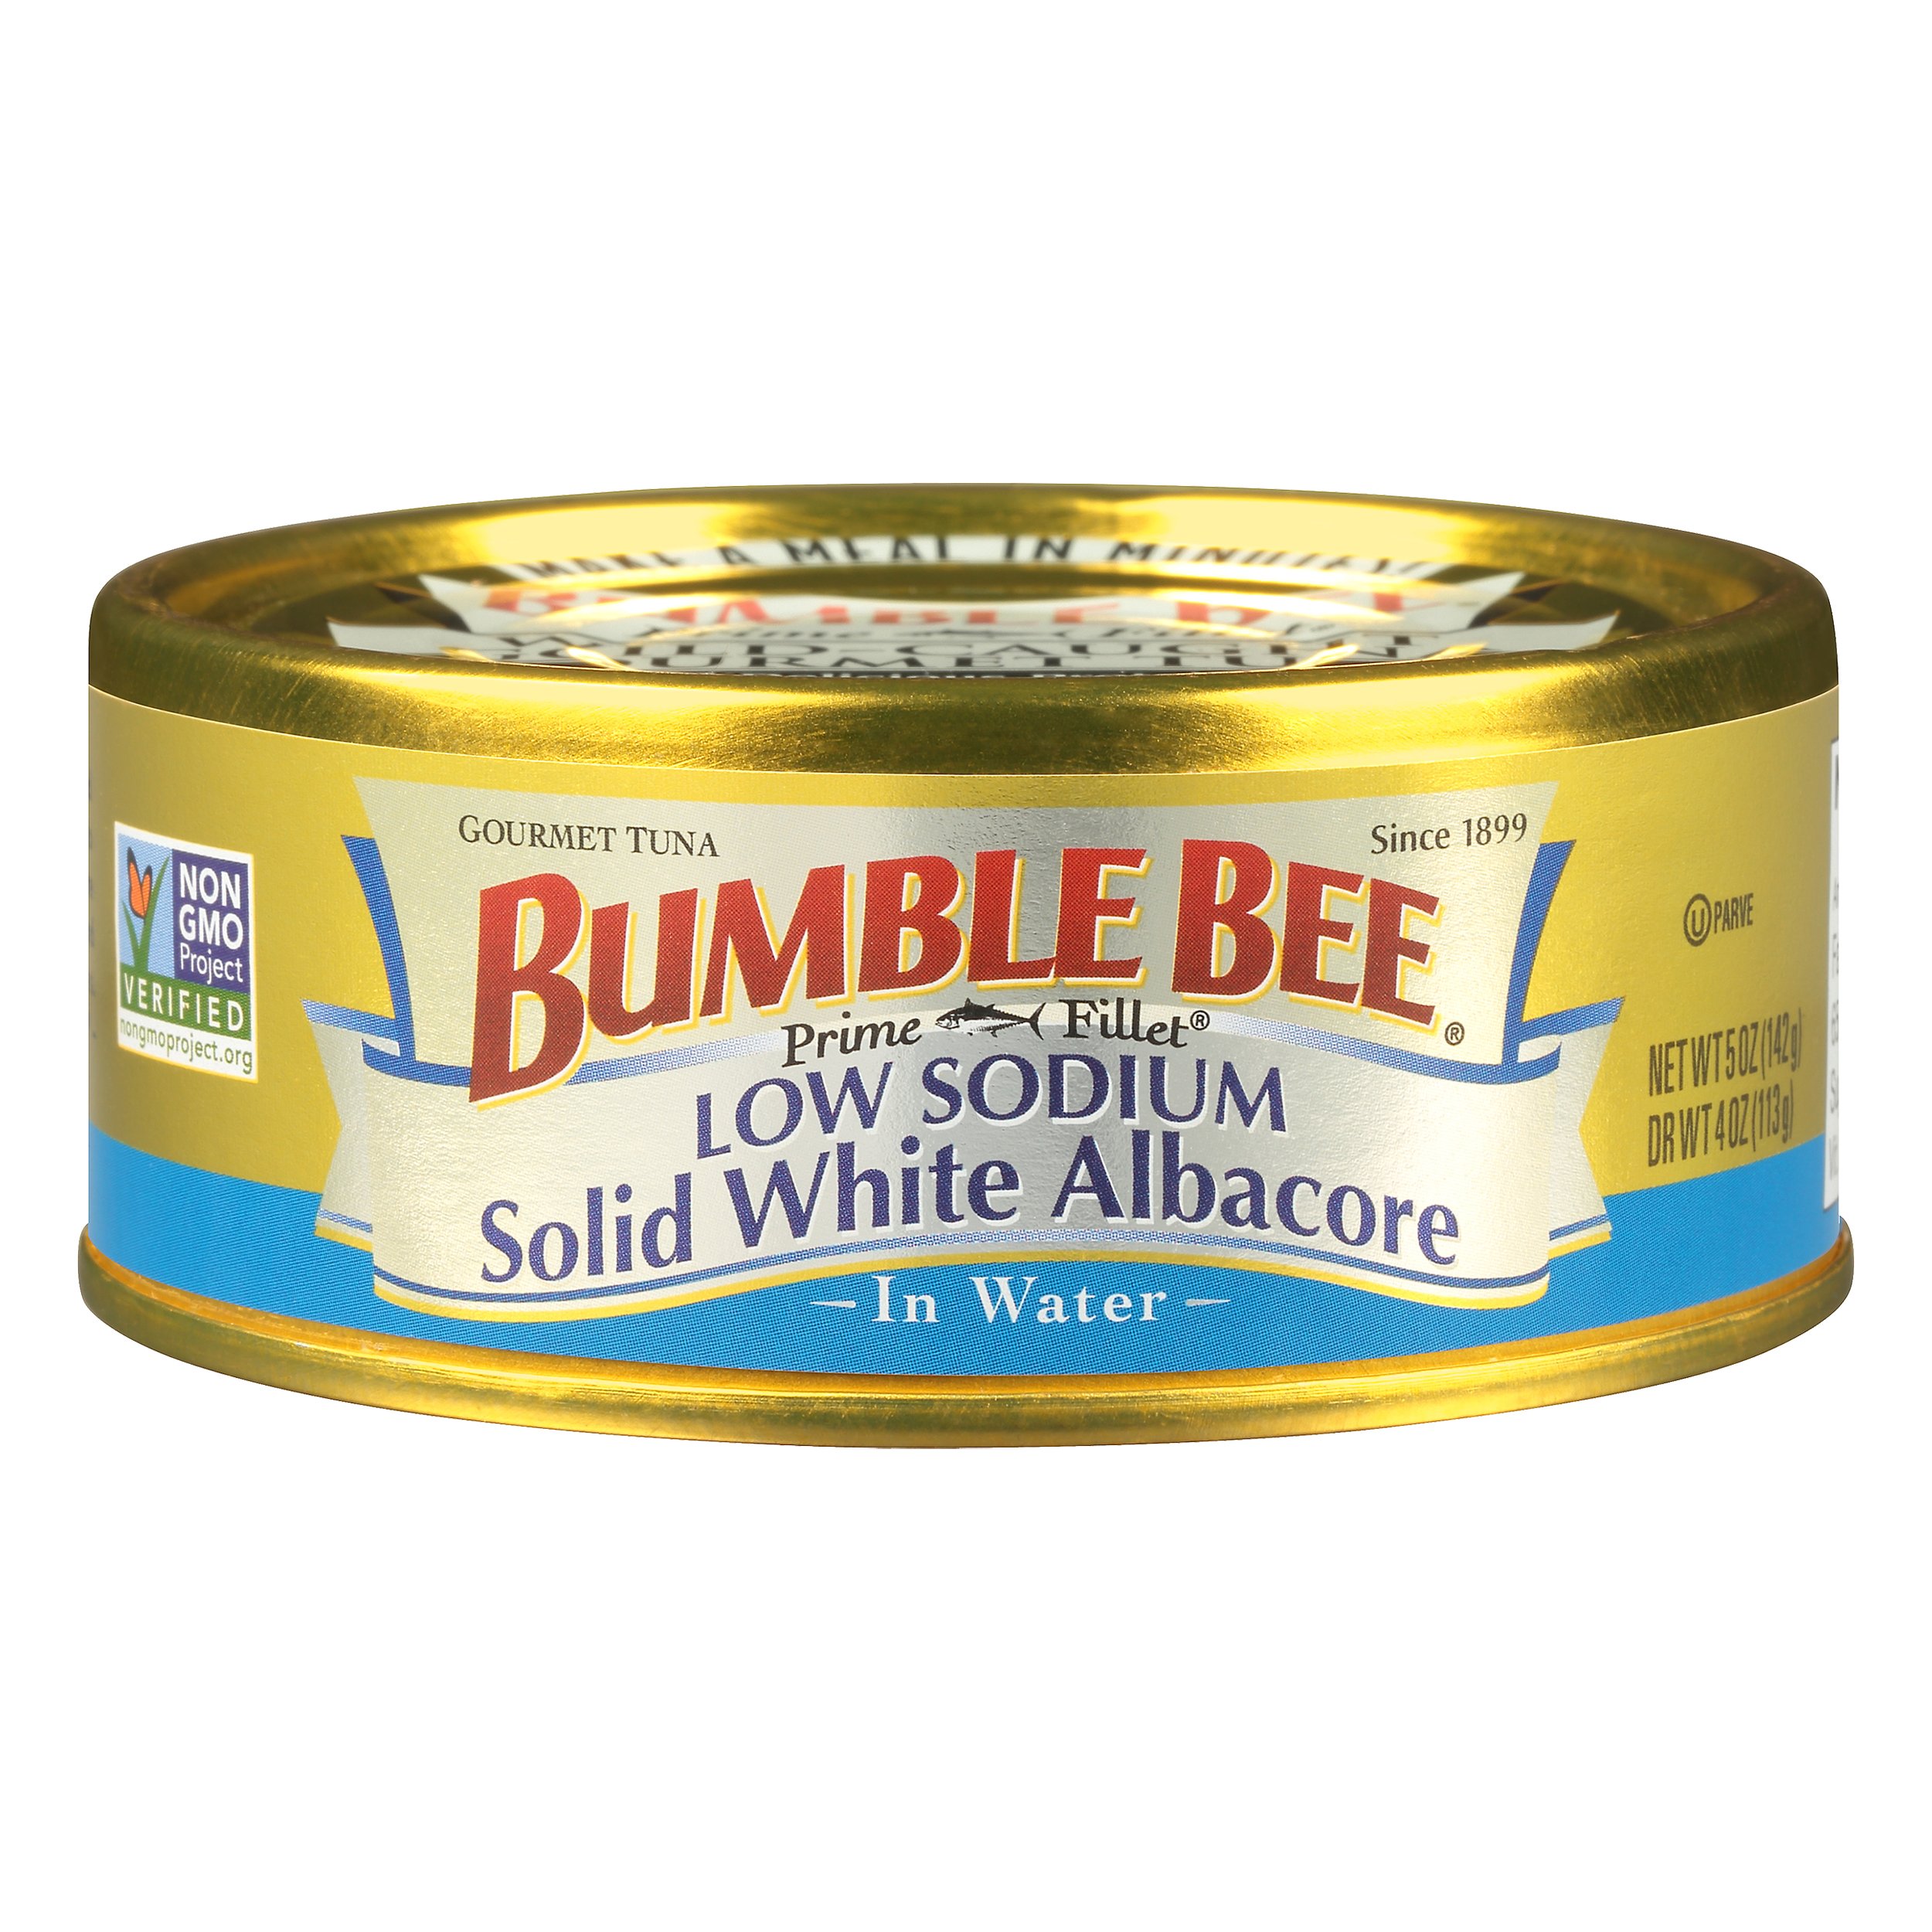 Bumble Bee Very Low Sodium Solid White Albacore 5.0 OZ 24-Pack